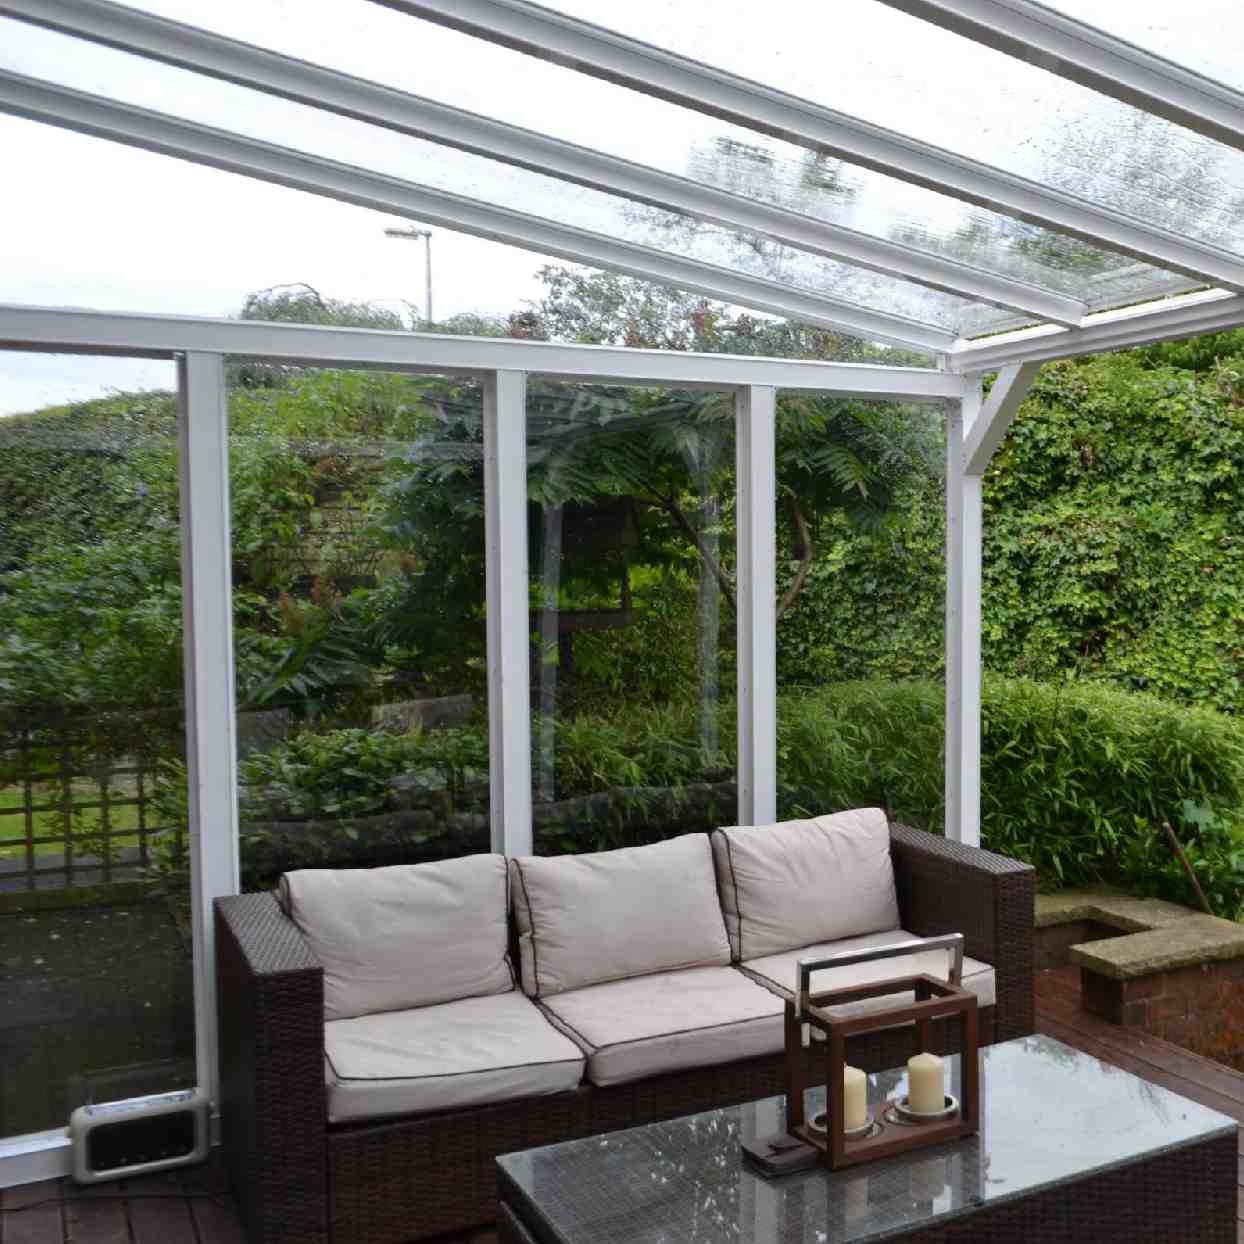 Buy Omega Verandah White with 16mm Polycarbonate Glazing - 2.8m (W) x 4.0m(P), (2) Supporting Posts online today